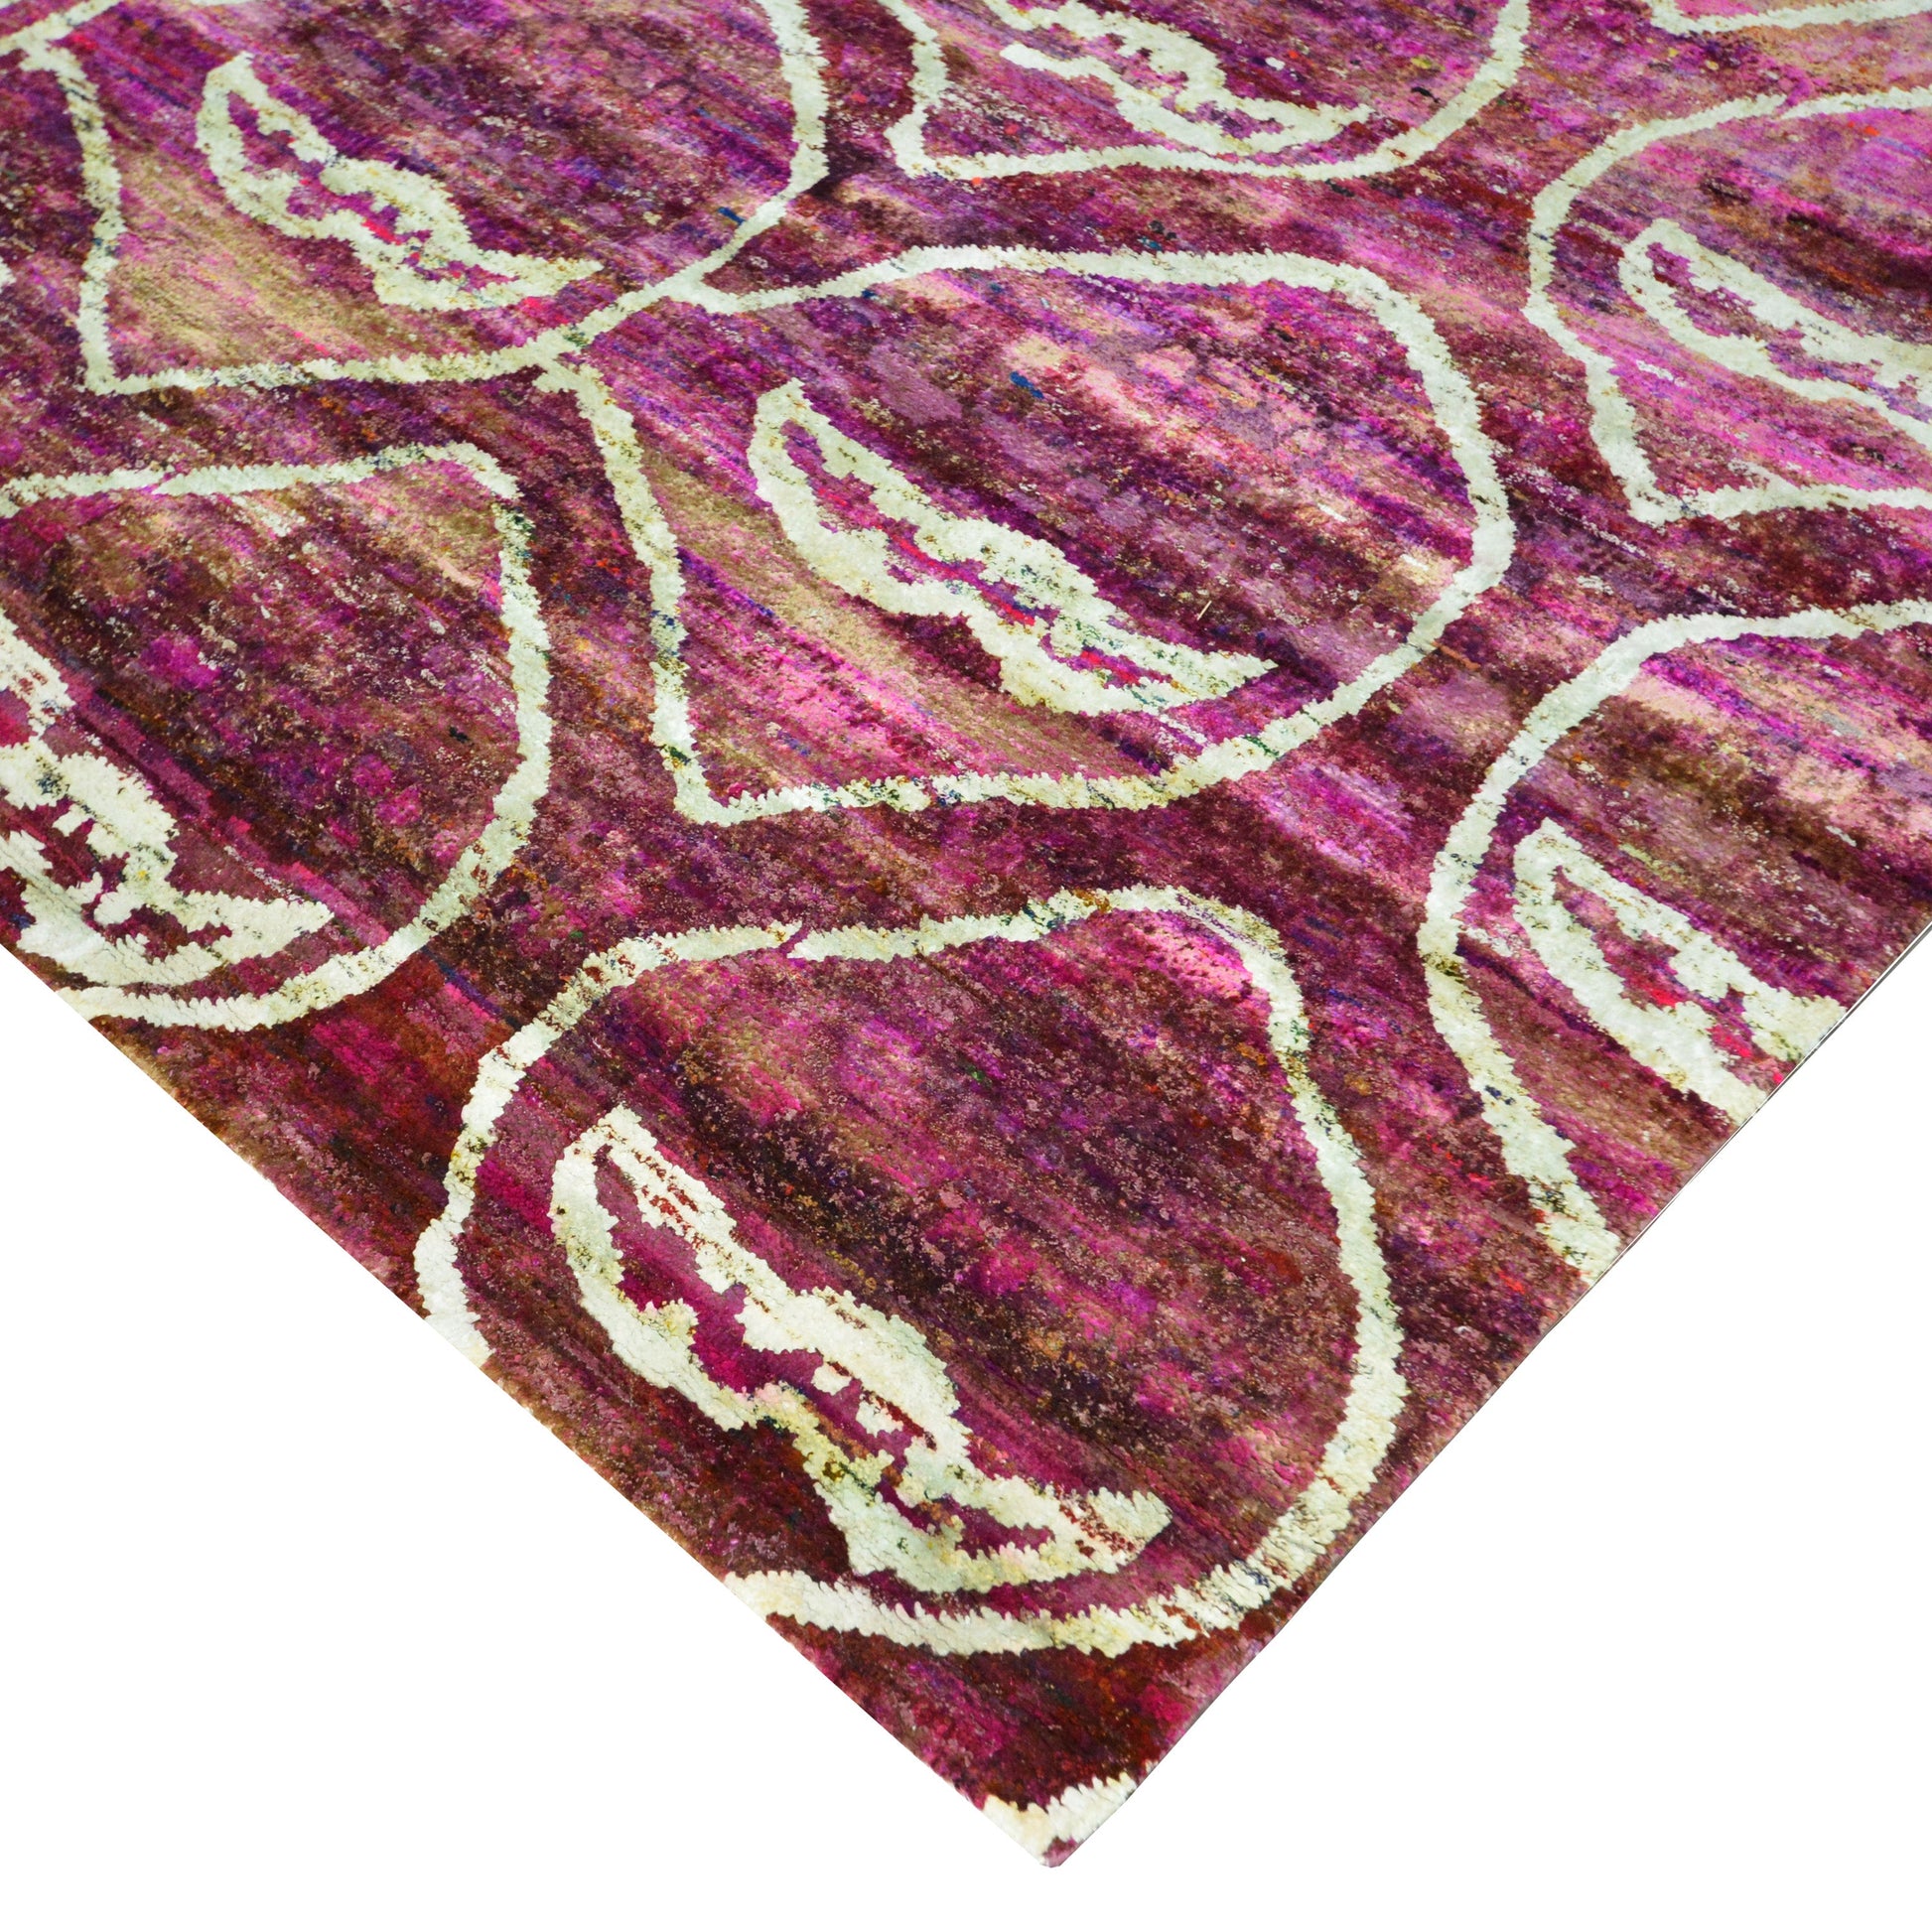 Get trendy with Rose Pink and Ivory Pure Sari Silk Contemporary Damask Handknotted Area Rug - Contemporary Rugs available at Jaipur Oriental Rugs. Grab yours for $5400.00 today!